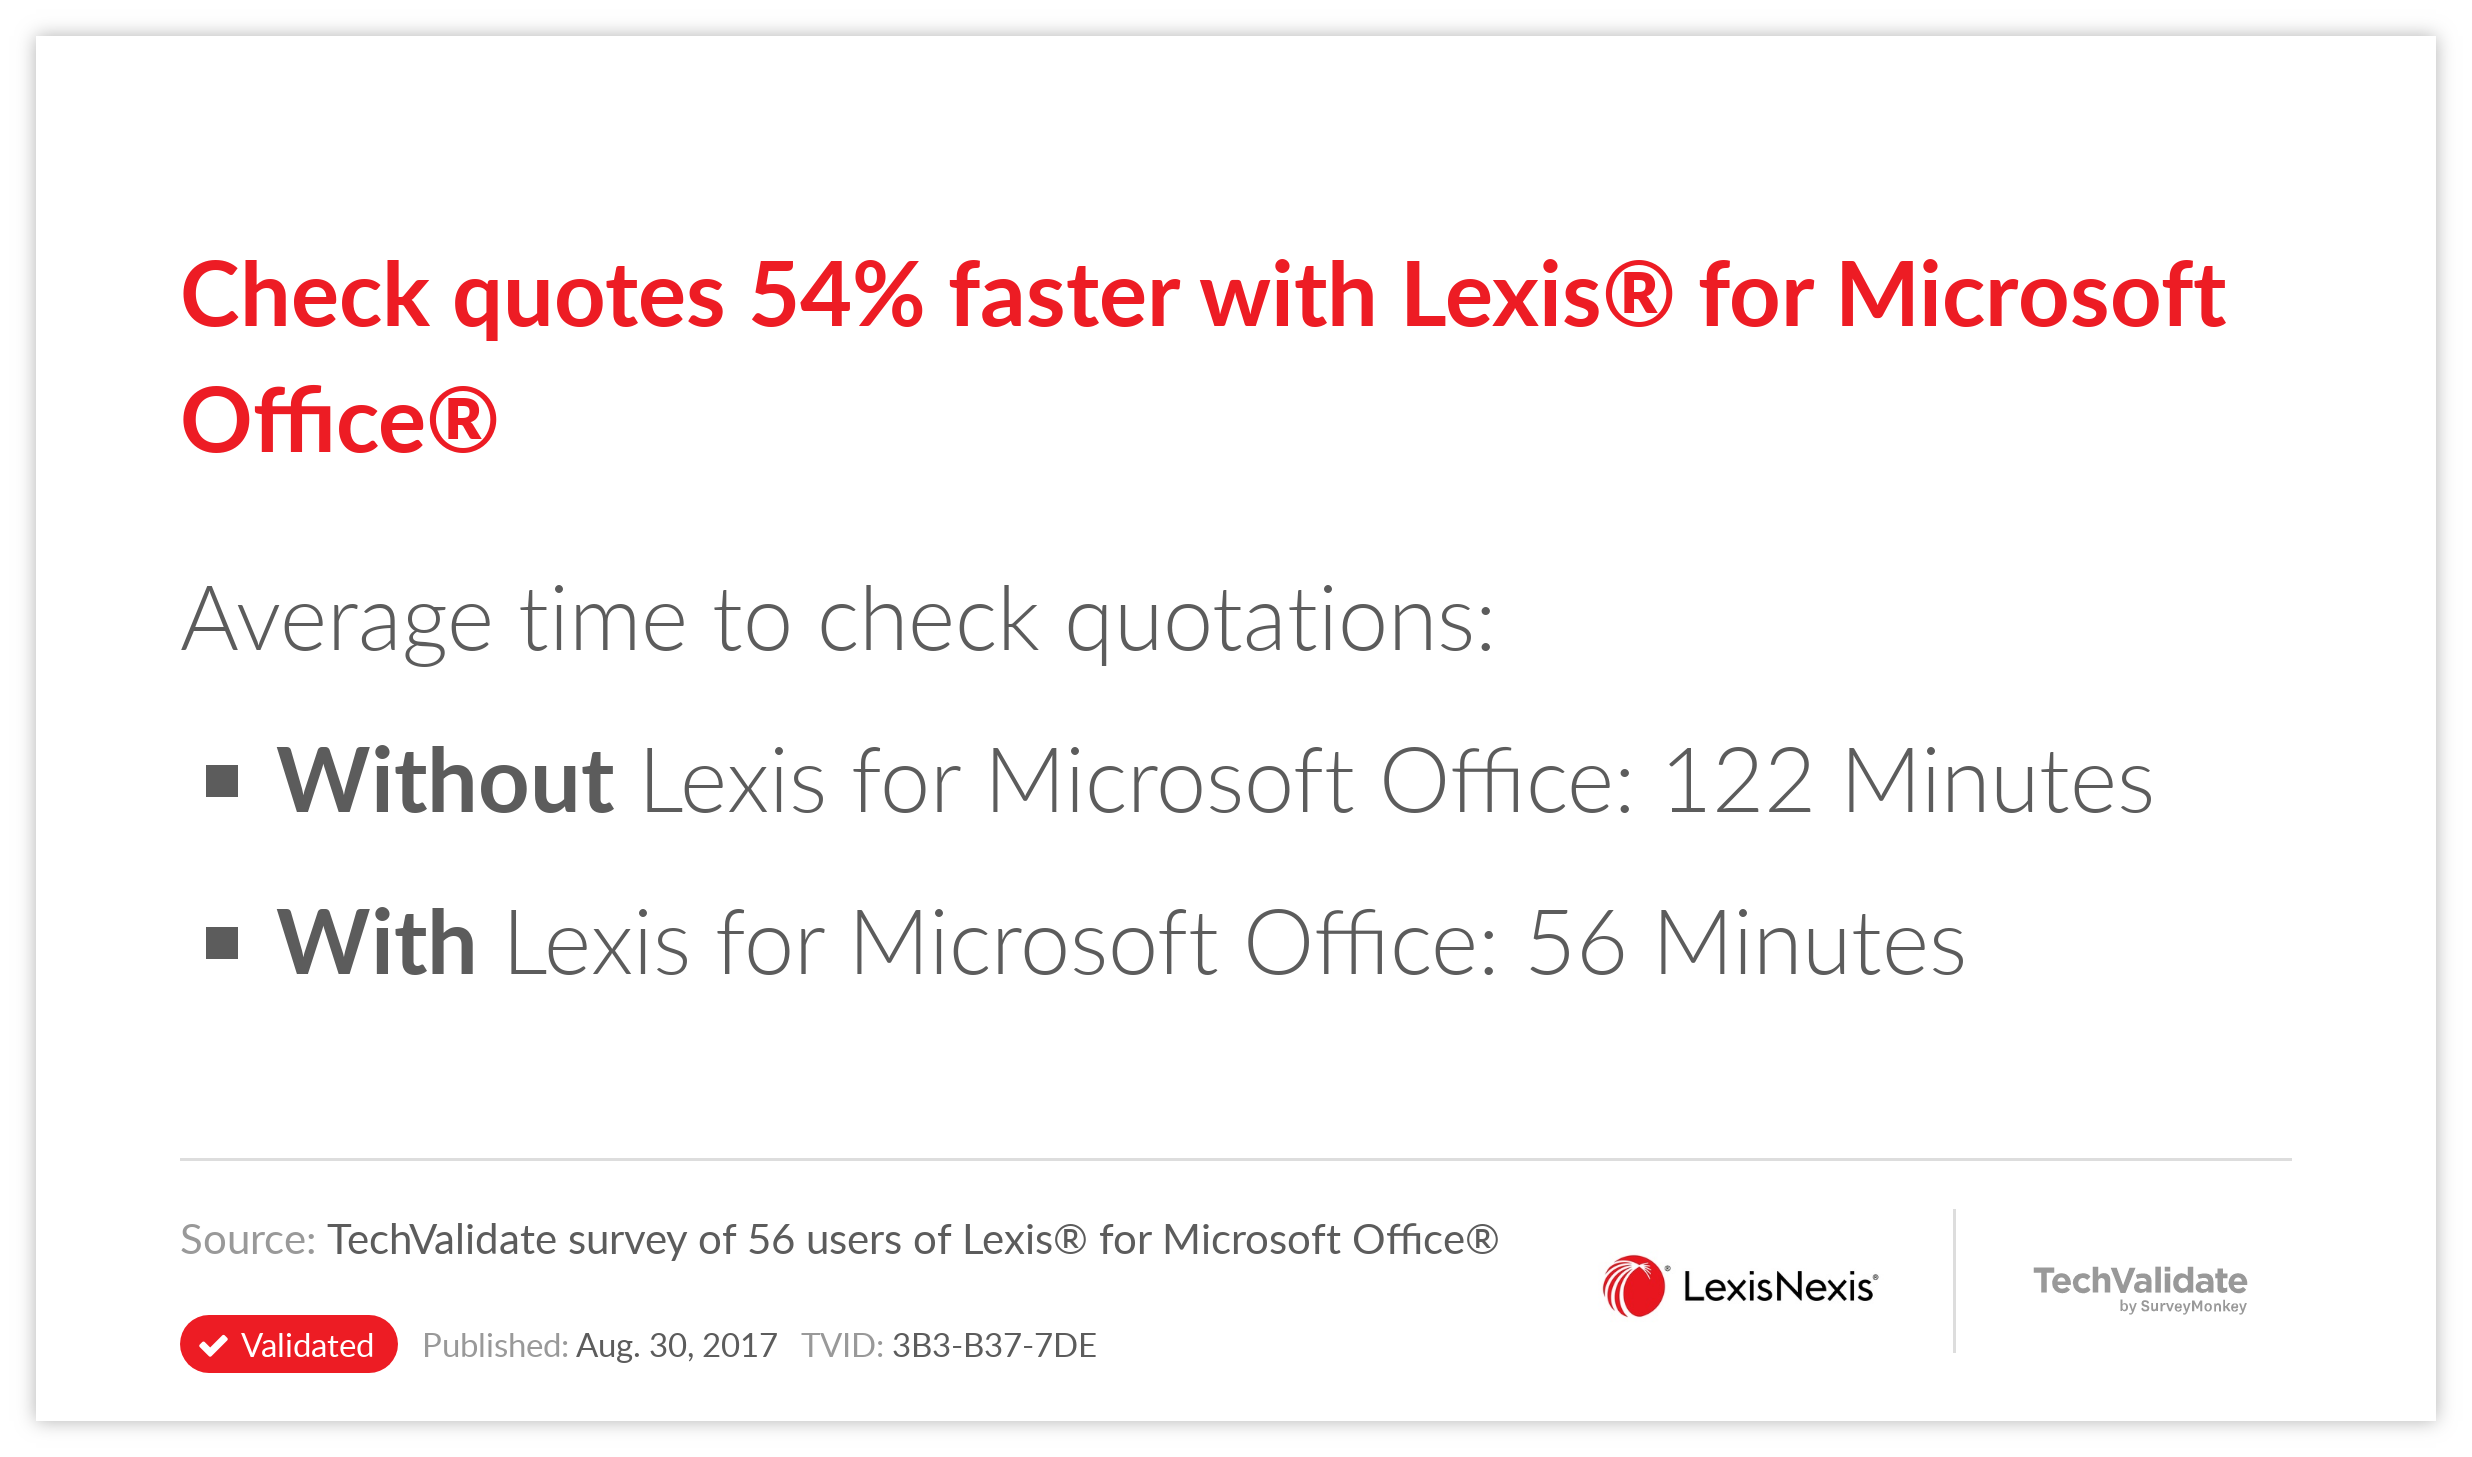 Check quotes 54% faster with Lexis® for Microsoft Office®